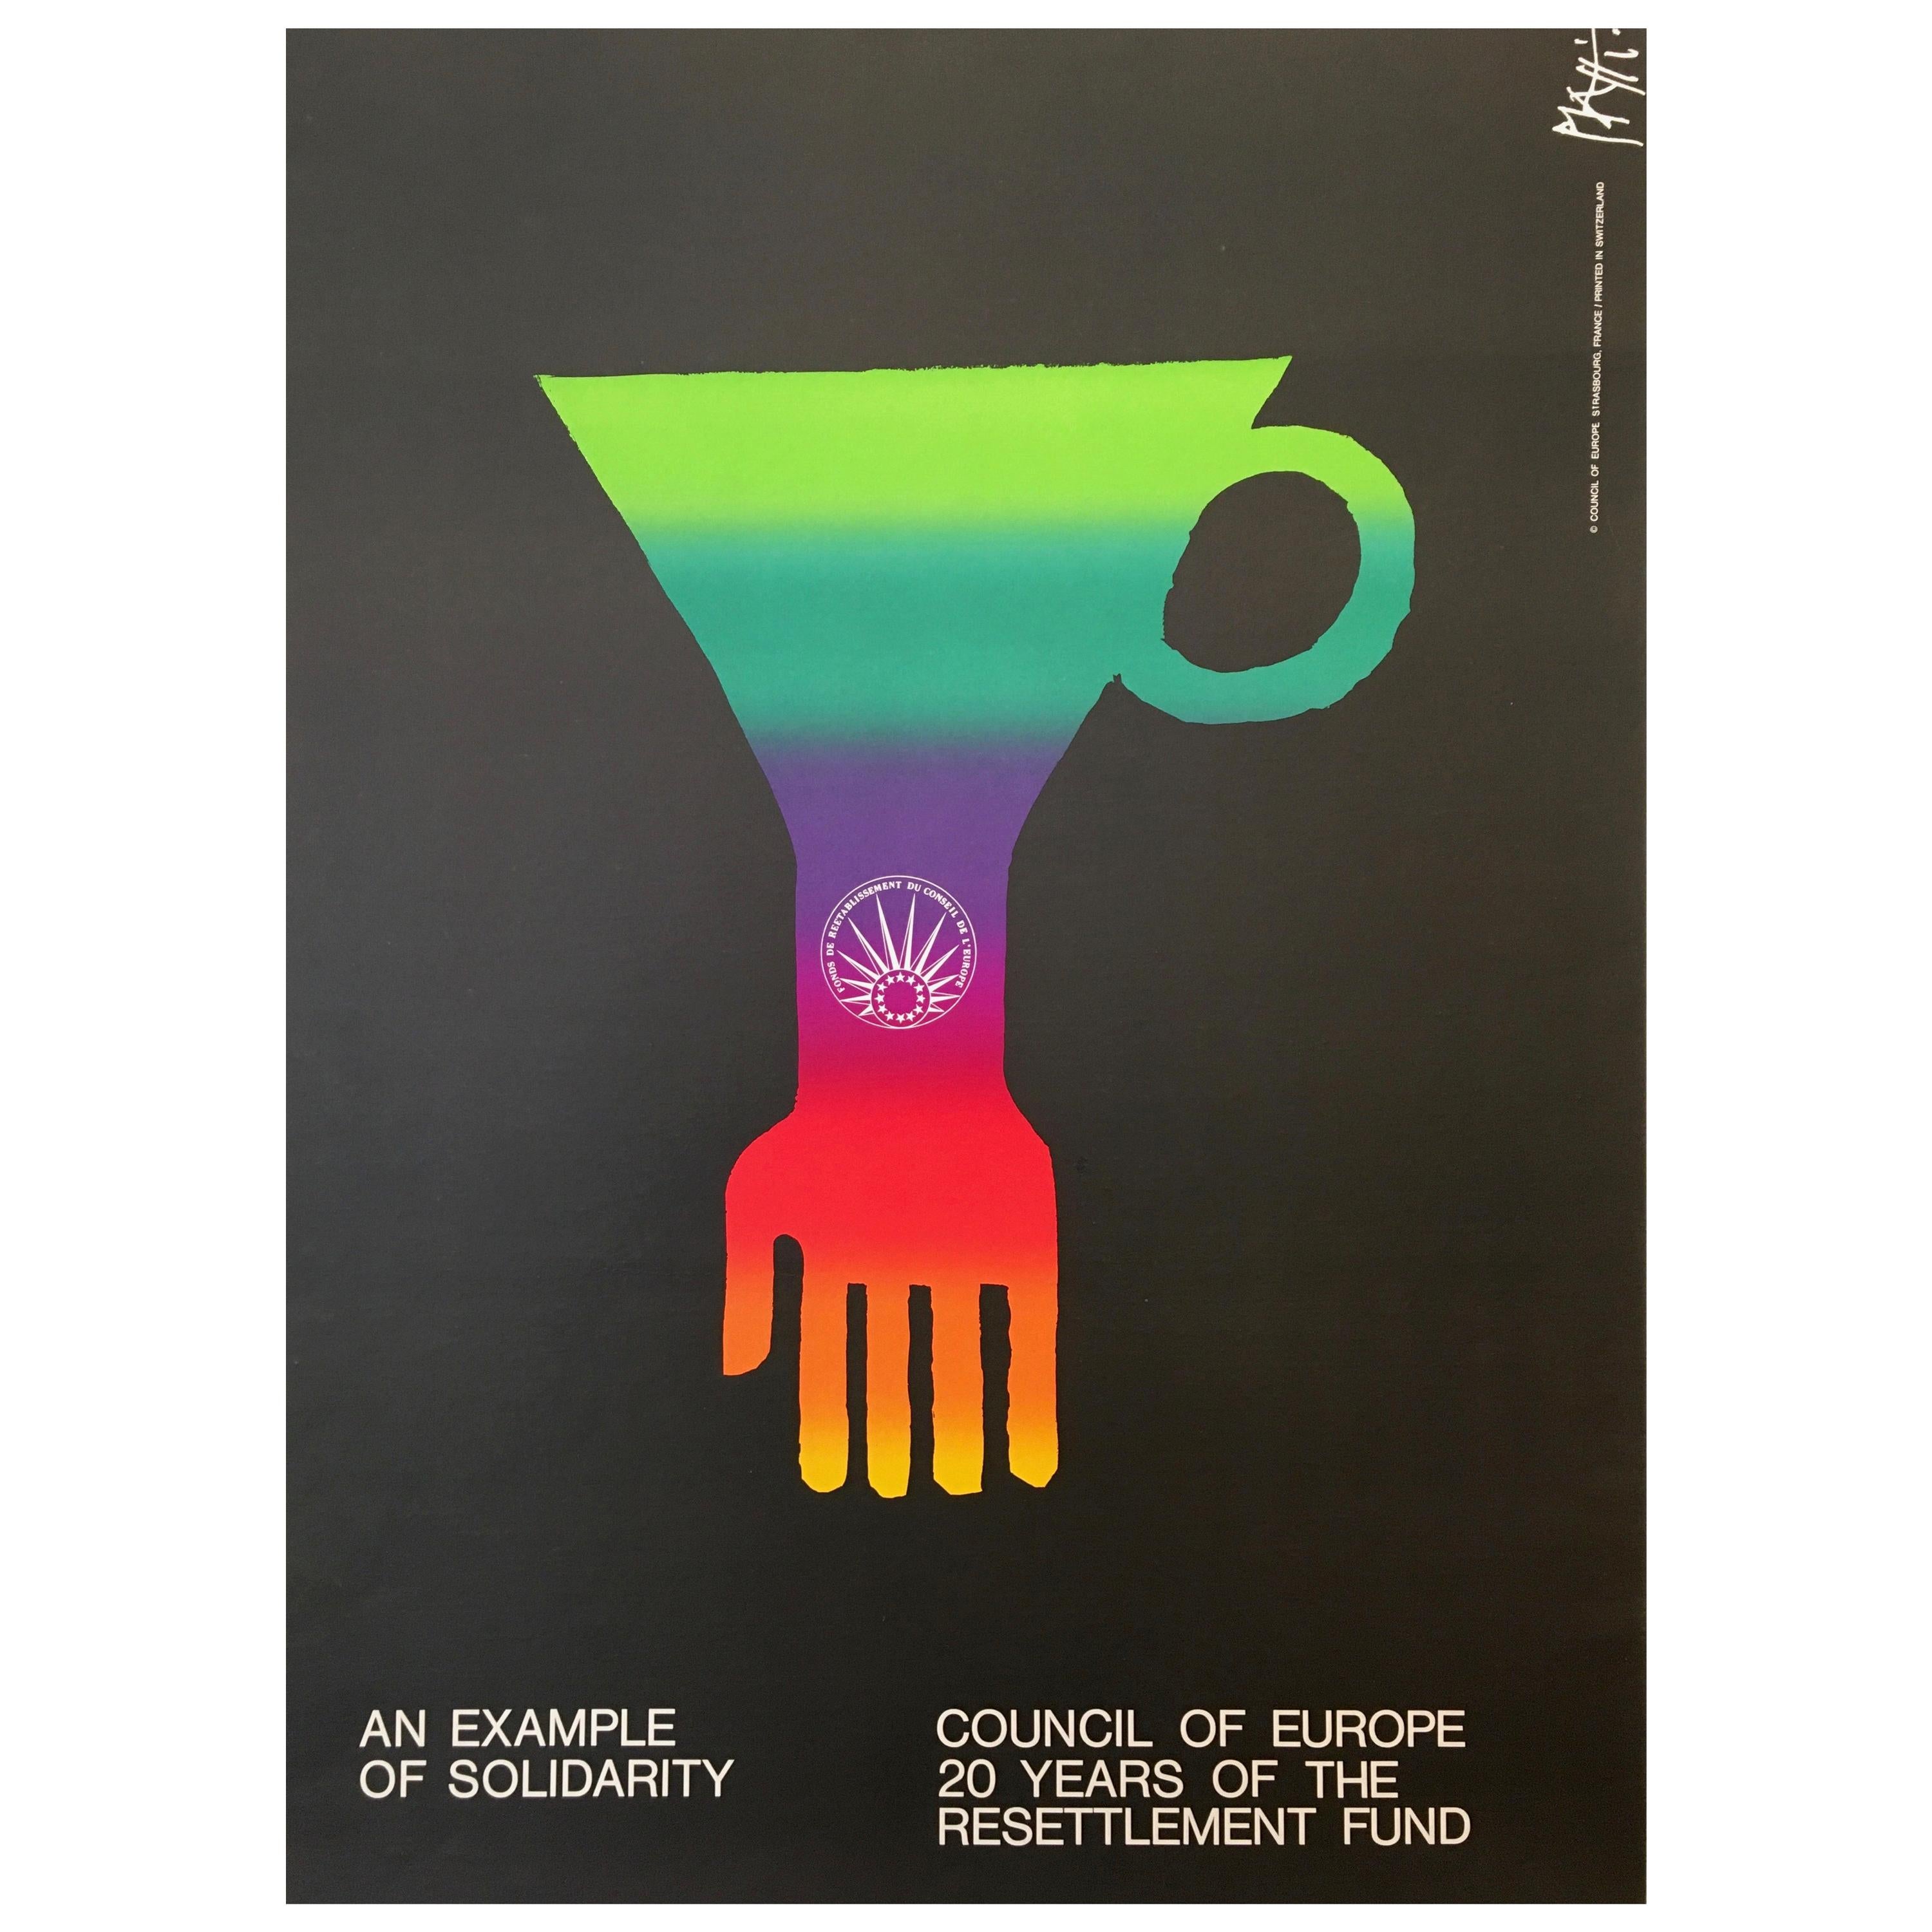 'An Example of Solidarity - Council of Europe' Original Vintage Poster by Piatti